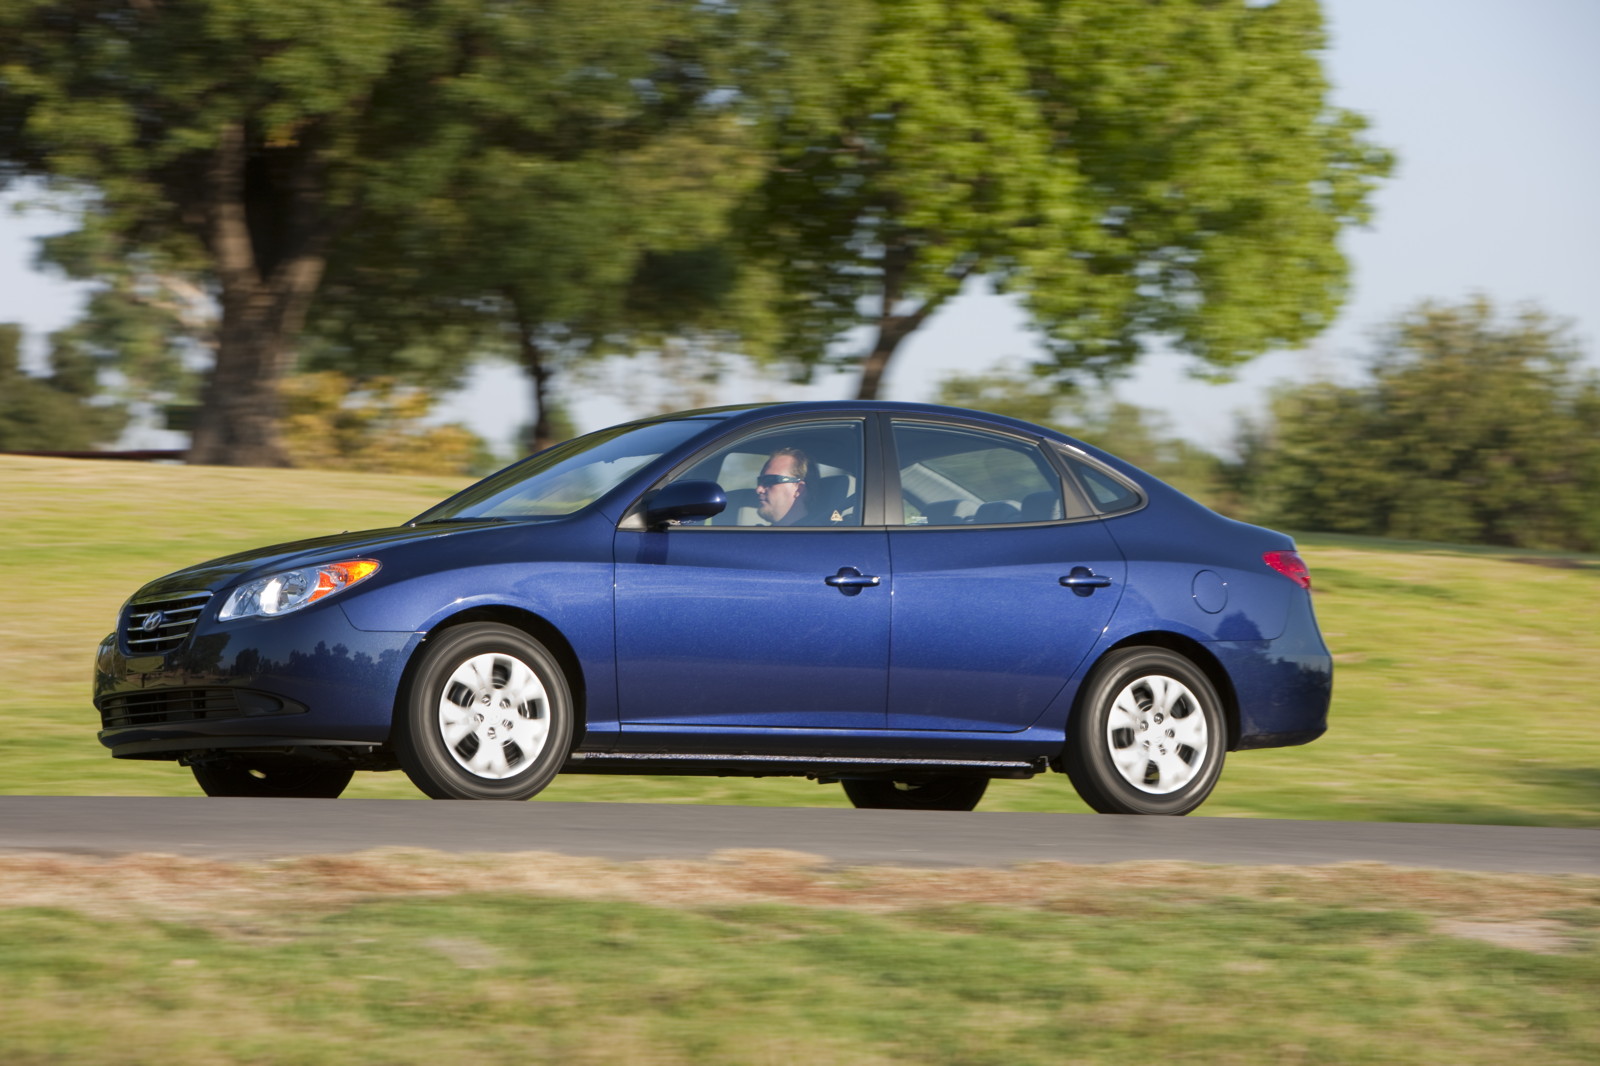 2010 Hyundai Elantra: It Isn't Easy Being Green, But Blue Has Potential